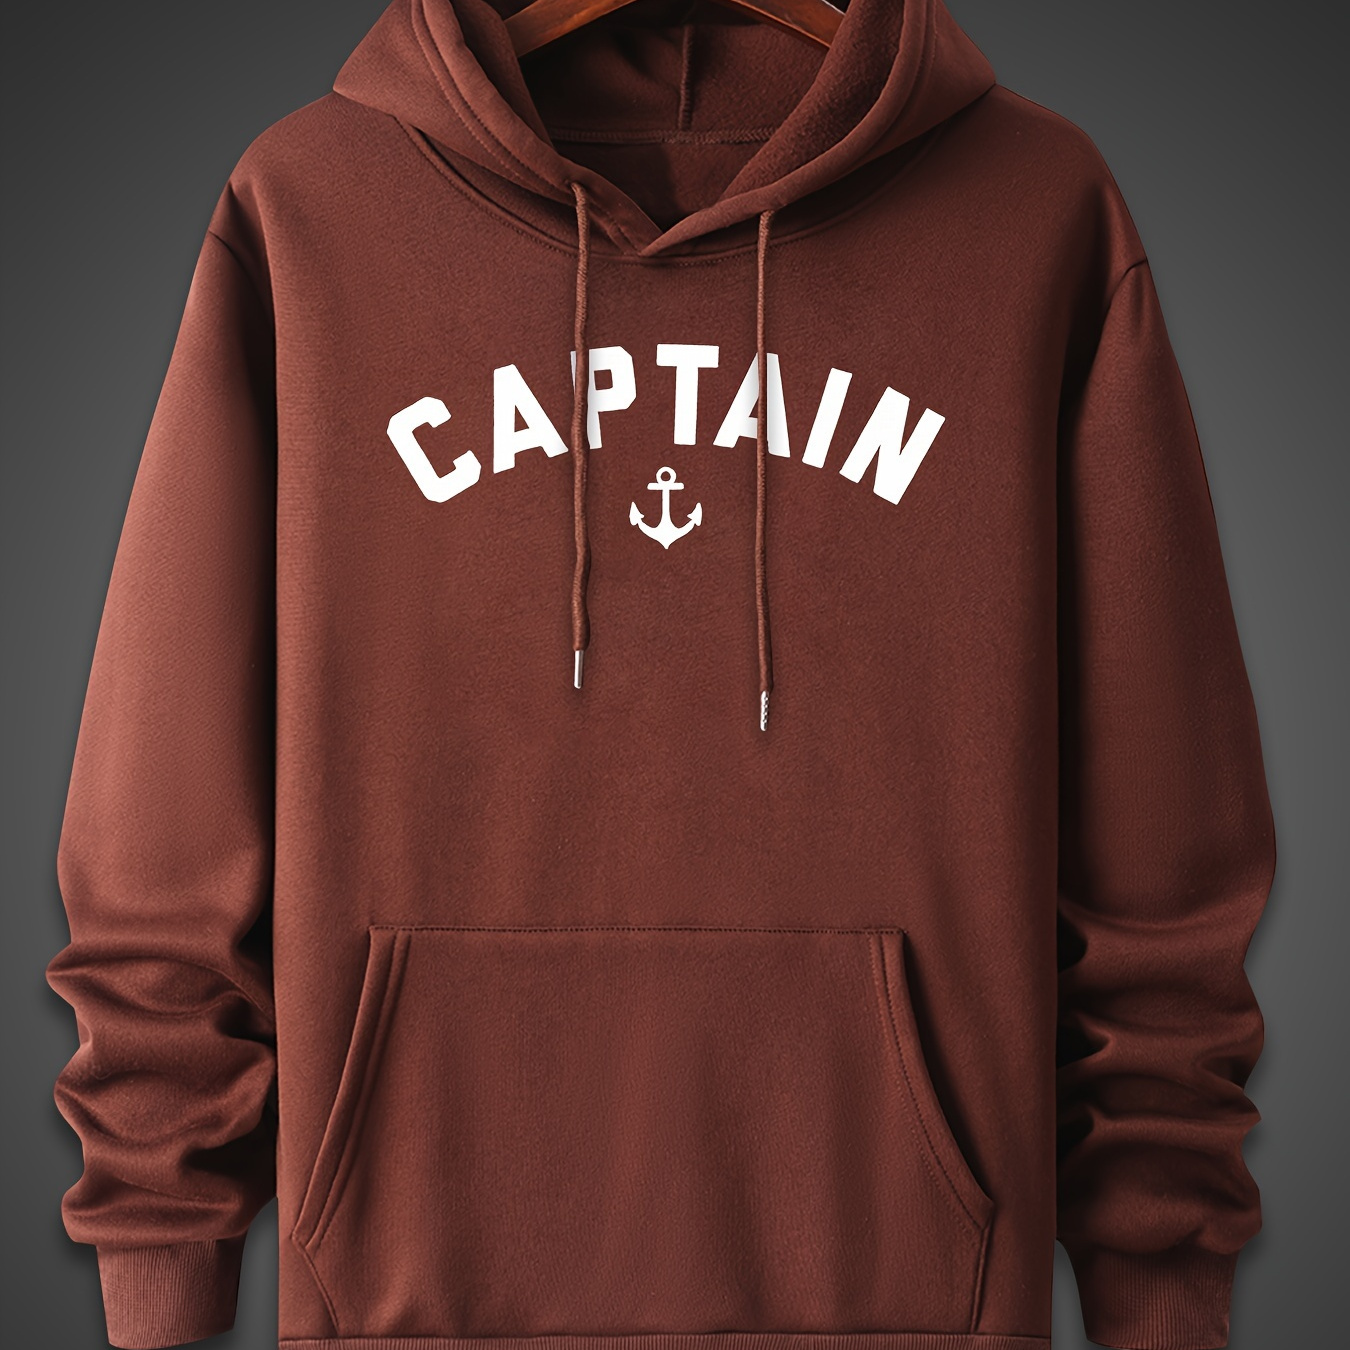 

Men's Captain Letter Print Hoodie With Pocket, Casual Loose Hooded Long Sleeve Slightly Stretch Pullover Sweatshirt Top, Men's Clothings For Outdoor